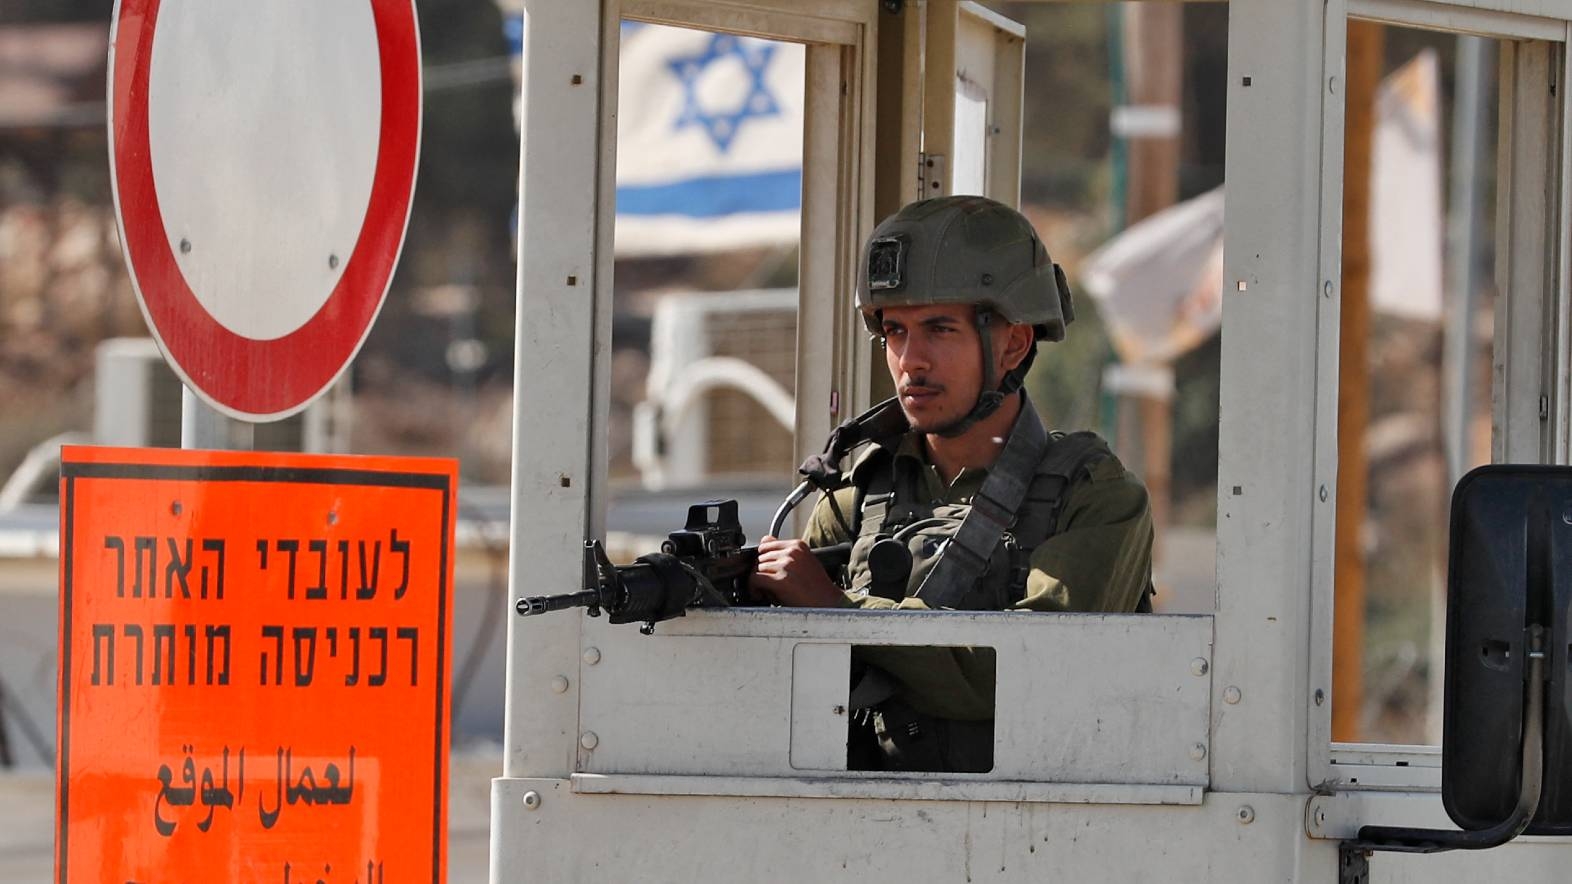 A member of Israeli security forces stands guard at the junction of Gush Etzion, a block of Israeli settlements near the Palestinian city of Bethlehem in the occupied West Bank, on 13 September 2021.